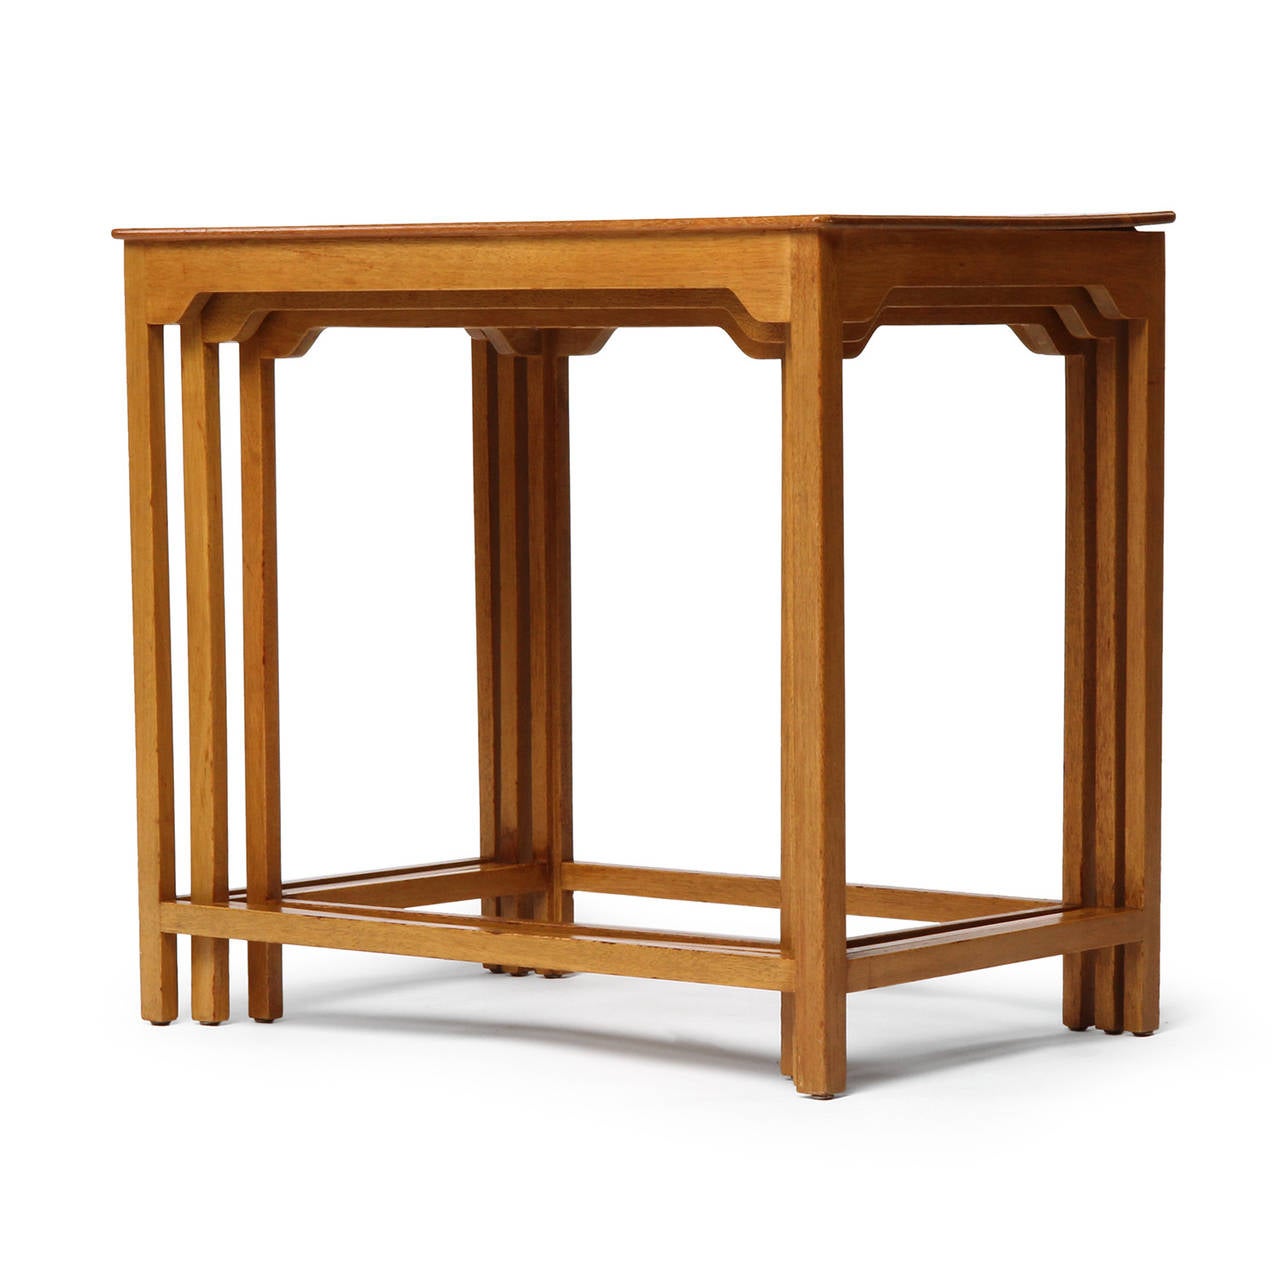 Nesting Tables by Edward Wormley In Good Condition For Sale In Sagaponack, NY